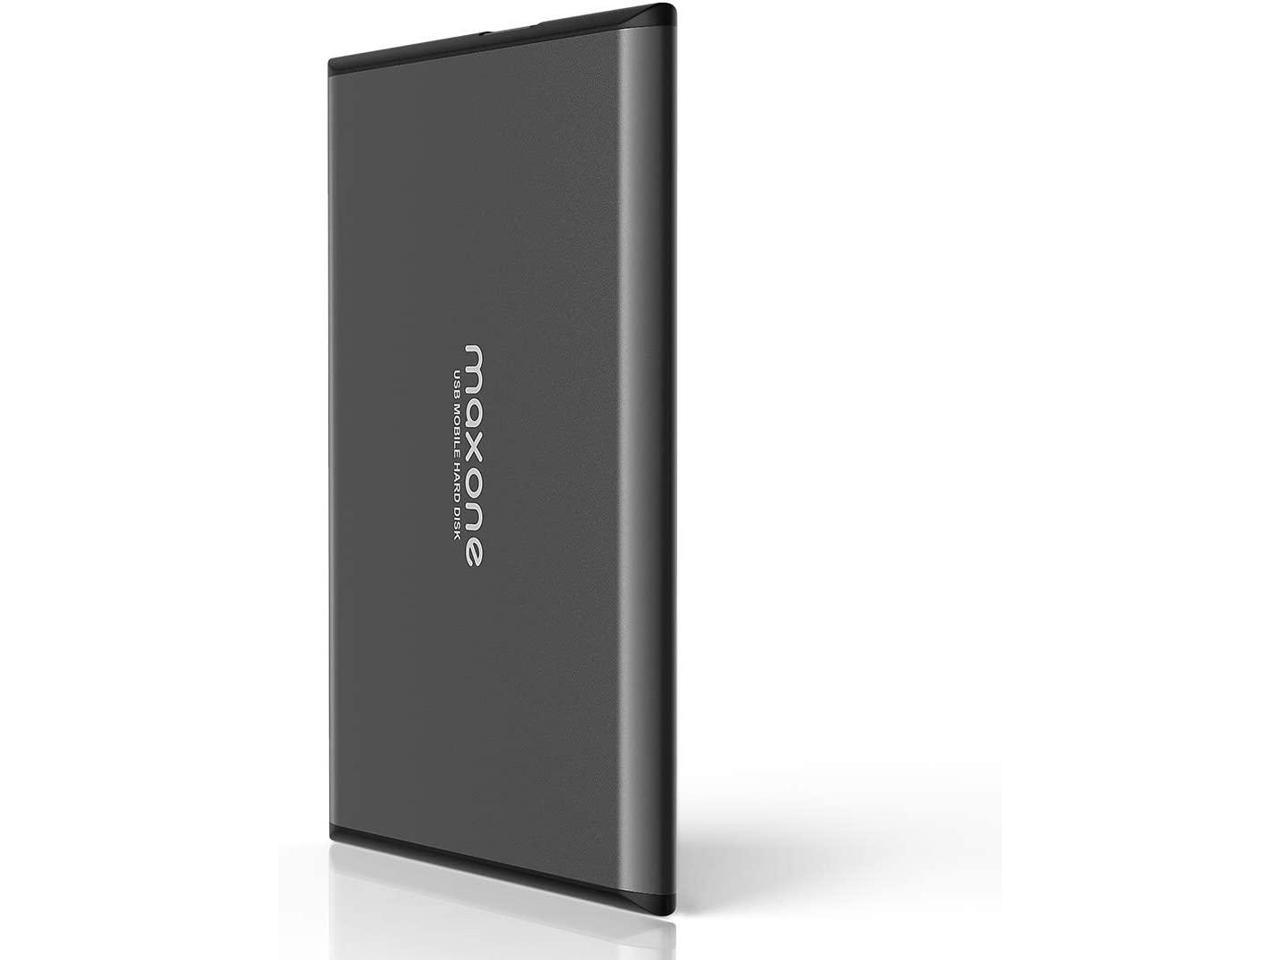 Desktop,PS4 Mac NRICO 250GB Portable External Hard Drive USB 3.0 HDD 2.5inch Storage Compatible for PC 250GB, Grey